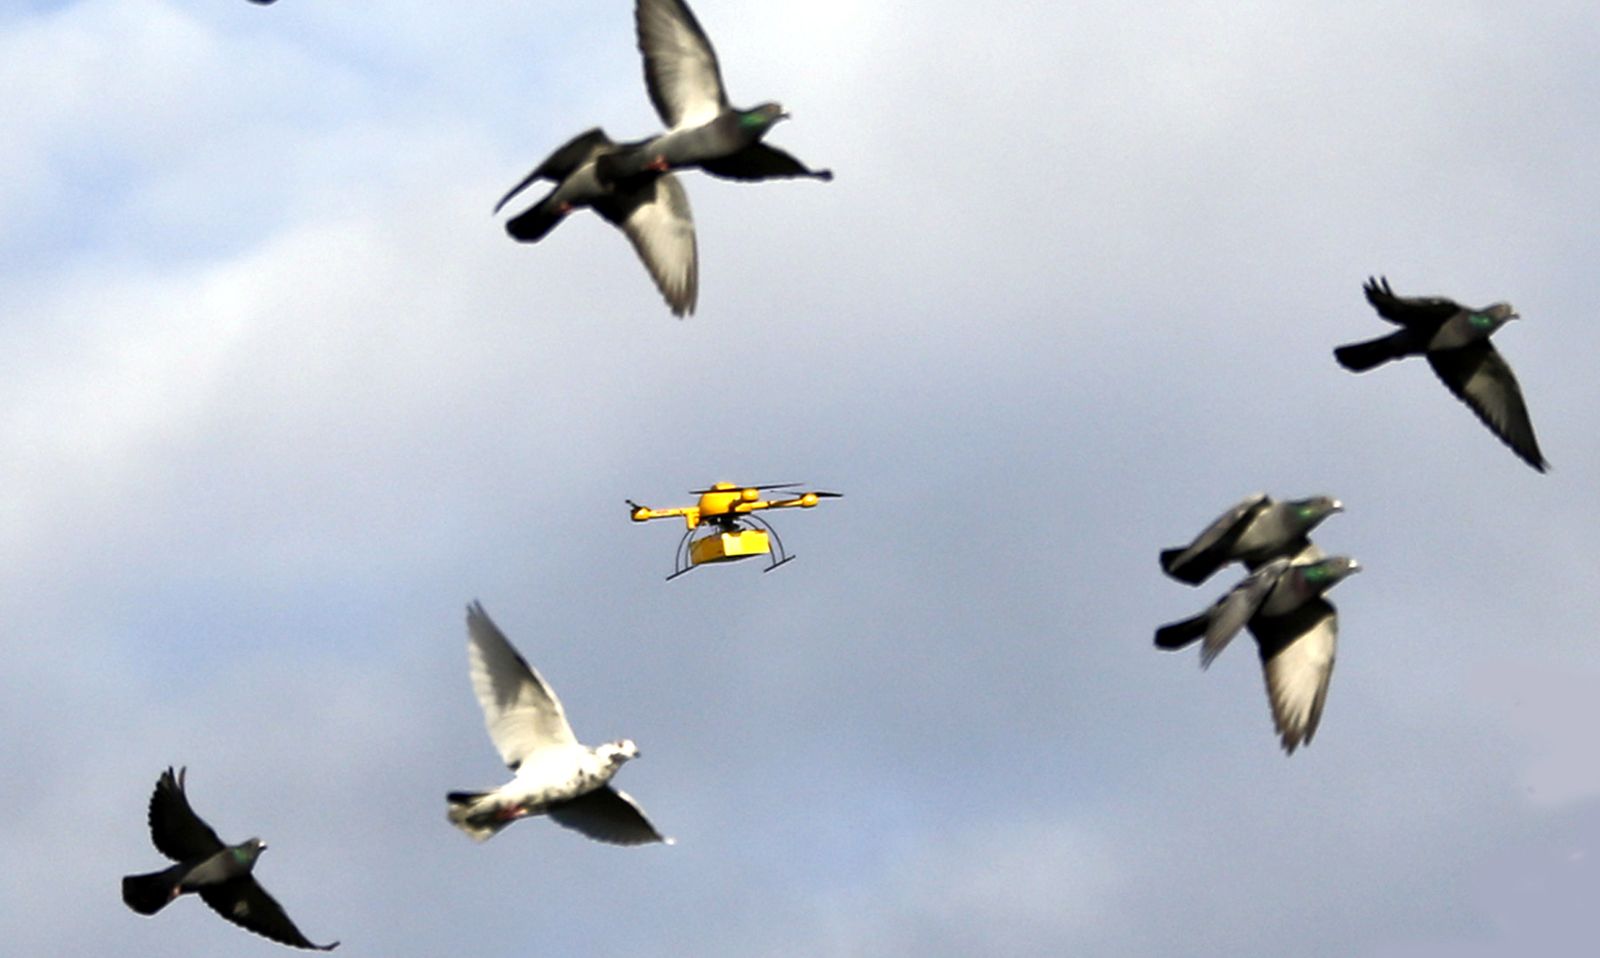 How a Flock of 400 Flying Birds Manages to Turn in Just Half a Second, Smart News